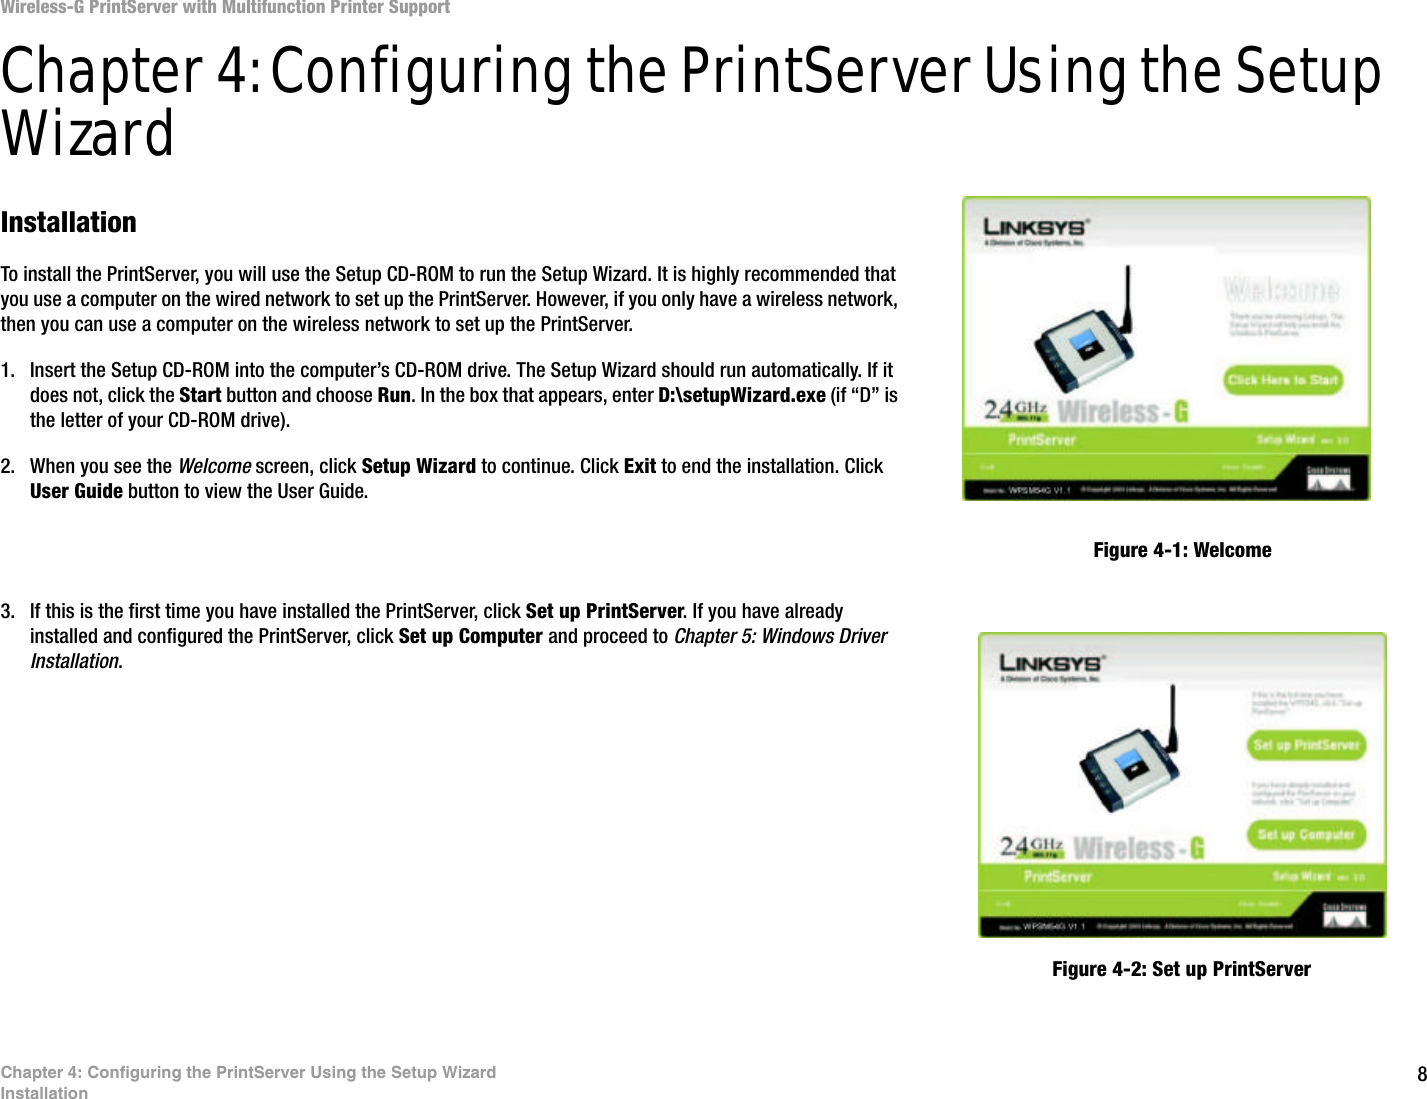 8Chapter 4: Configuring the PrintServer Using the Setup WizardInstallationWireless-G PrintServer with Multifunction Printer SupportChapter 4: Configuring the PrintServer Using the Setup WizardInstallationTo install the PrintServer, you will use the Setup CD-ROM to run the Setup Wizard. It is highly recommended that you use a computer on the wired network to set up the PrintServer. However, if you only have a wireless network, then you can use a computer on the wireless network to set up the PrintServer.1. Insert the Setup CD-ROM into the computer’s CD-ROM drive. The Setup Wizard should run automatically. If it does not, click the Start button and choose Run. In the box that appears, enter D:\setupWizard.exe (if “D” is the letter of your CD-ROM drive).2. When you see the Welcome screen, click Setup Wizard to continue. Click Exit to end the installation. Click User Guide button to view the User Guide.3. If this is the first time you have installed the PrintServer, click Set up PrintServer. If you have already installed and configured the PrintServer, click Set up Computer and proceed to Chapter 5: Windows Driver Installation. Figure 4-1: WelcomeFigure 4-2: Set up PrintServer